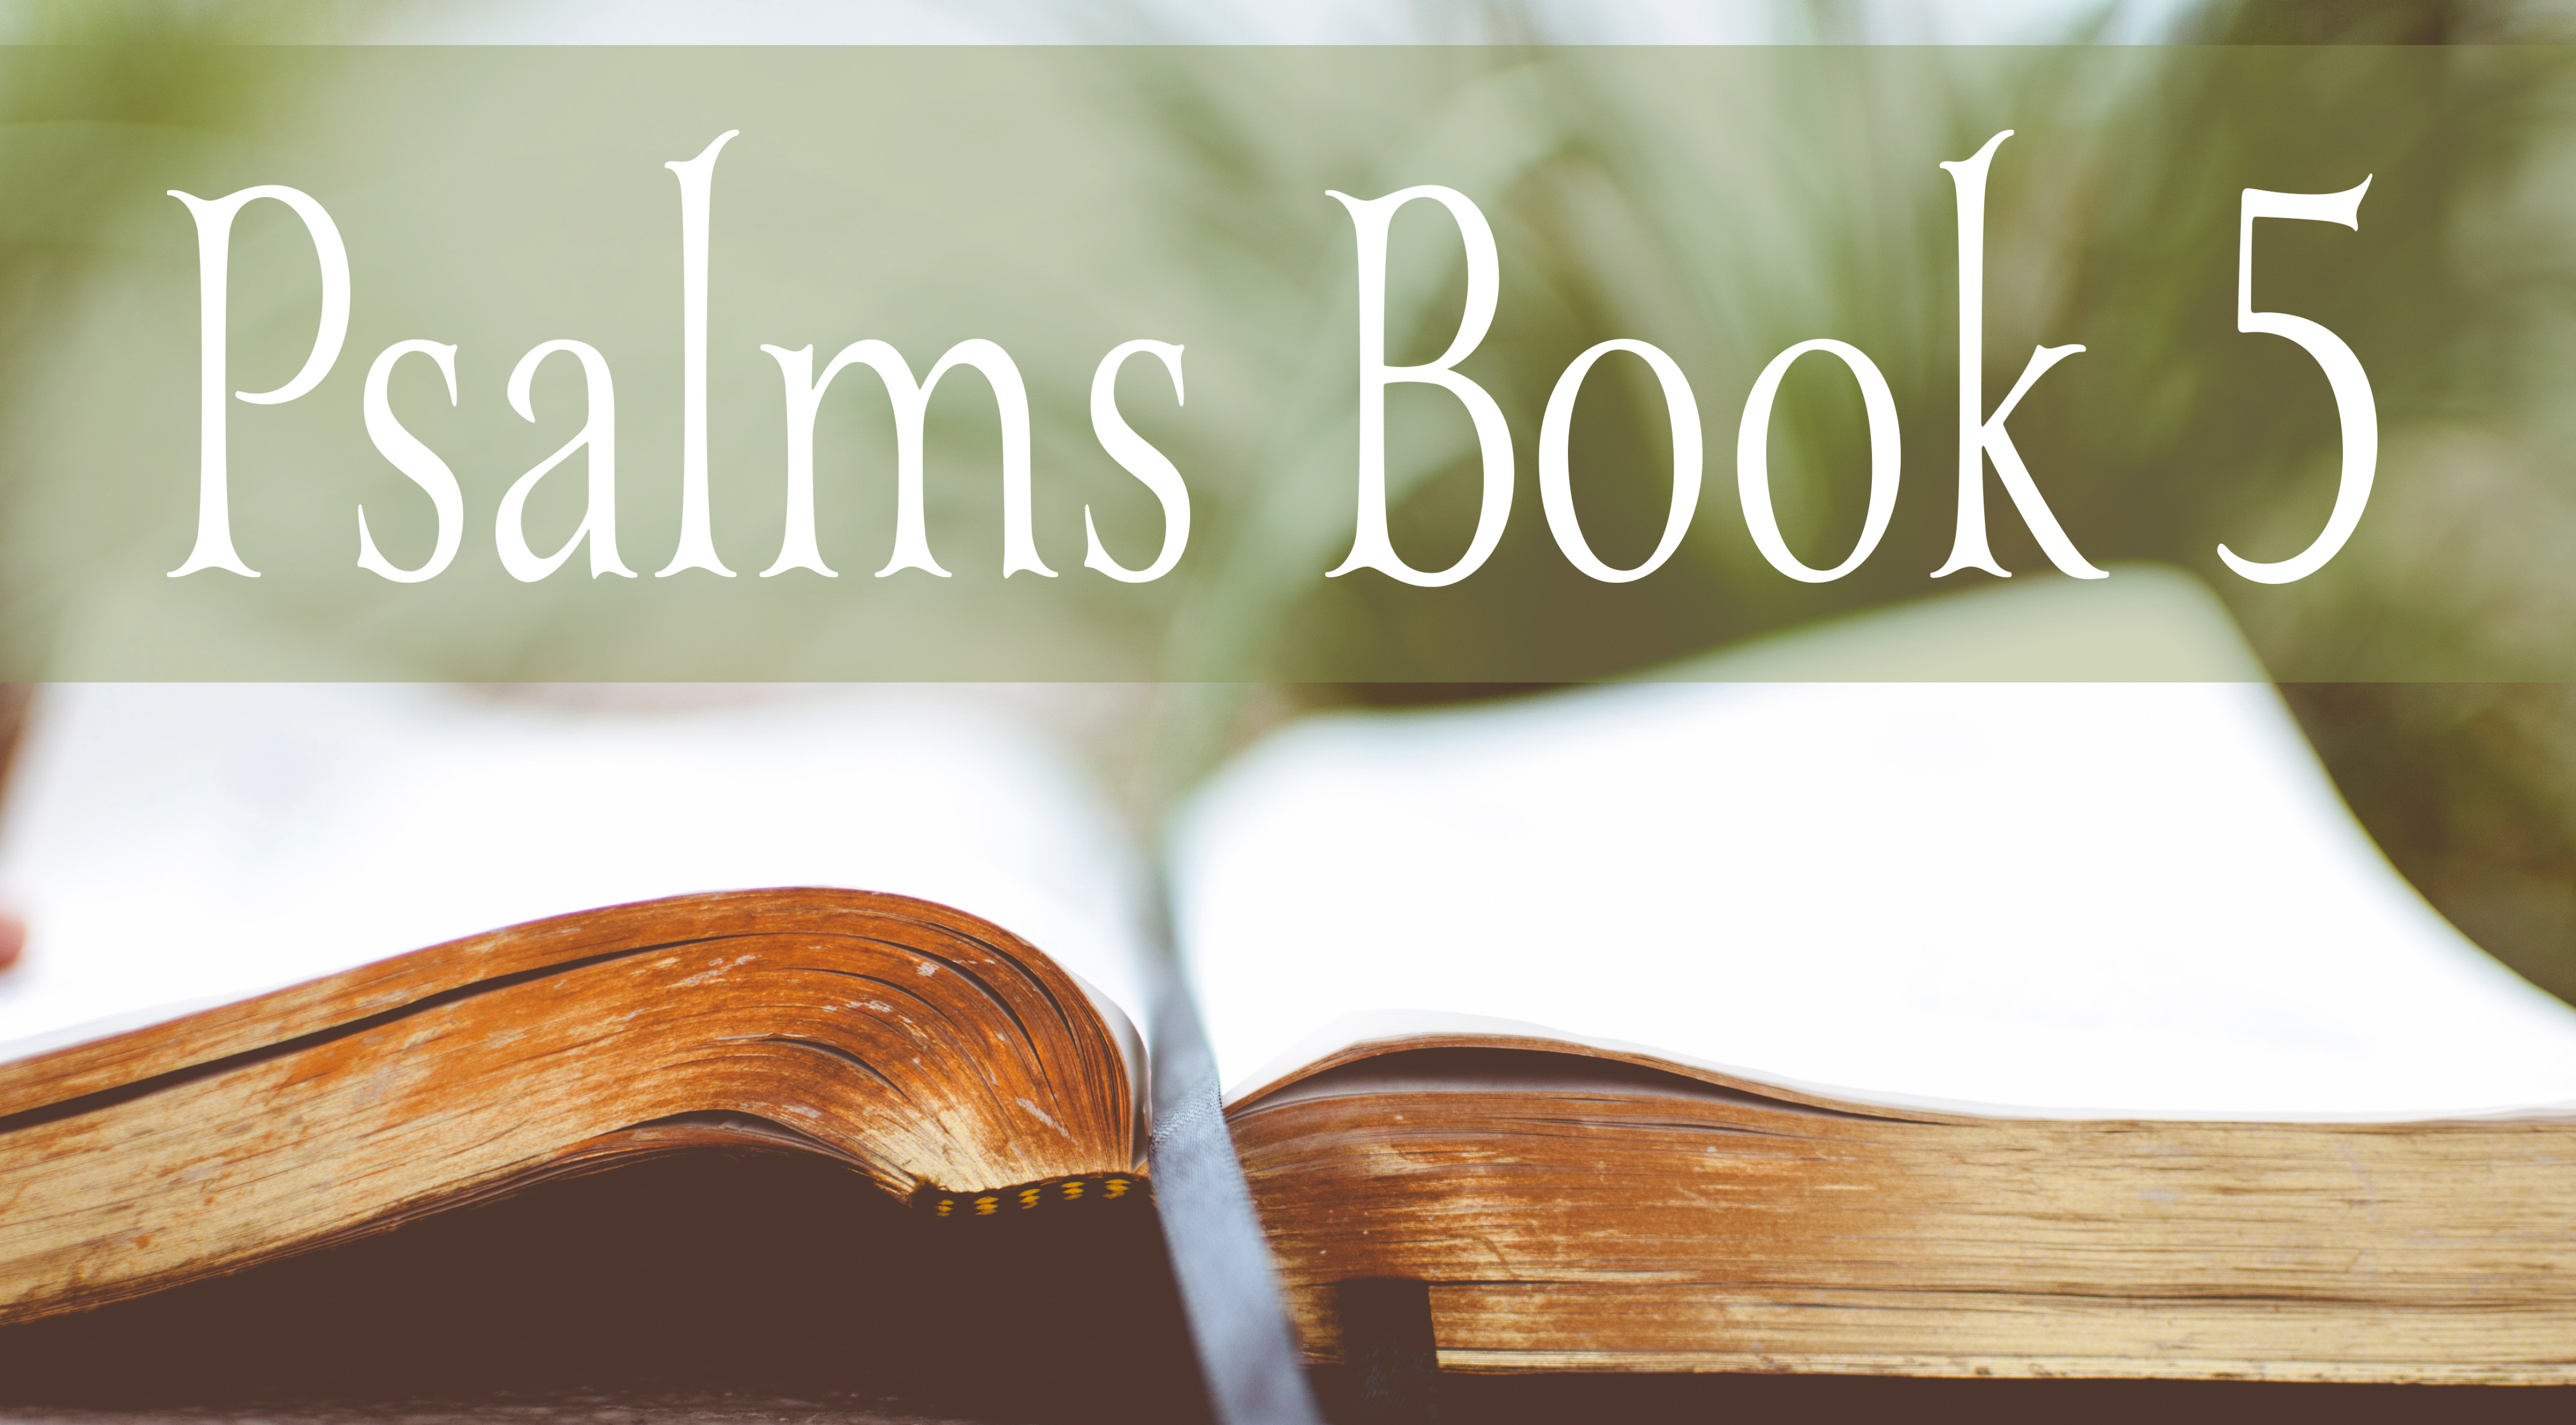 What Are The 5 Books Of Psalms